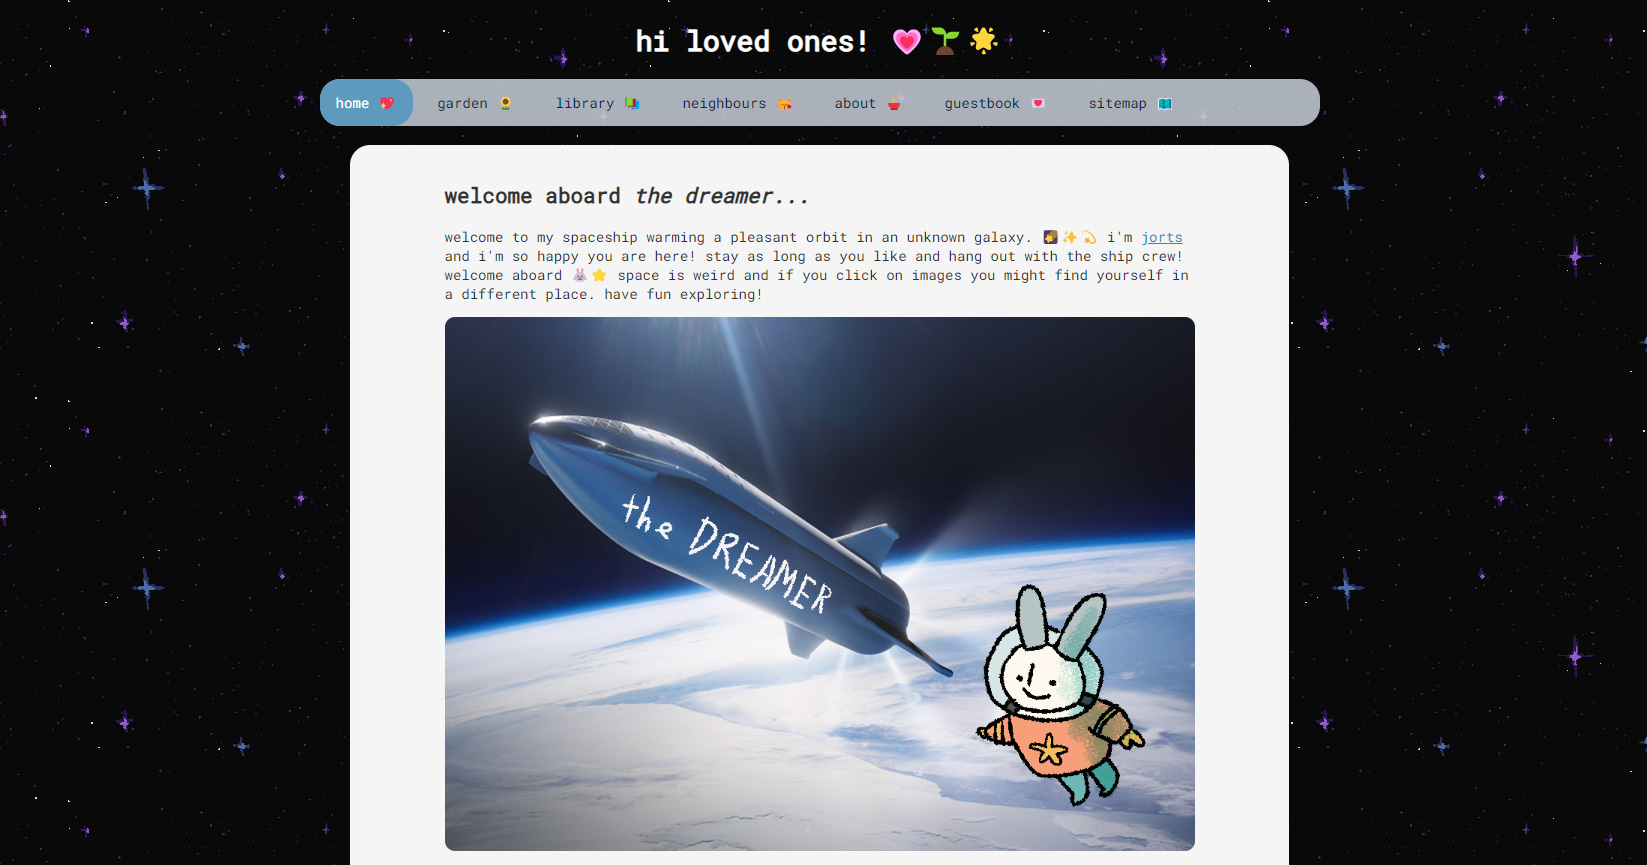 a screenshot of my website noodledesk, which mimics a spaceship. there is a navigation menu and the title at the top says hi loved ones. there is a drawing of a bunny in an astronaut suit floating next to a spaceship.